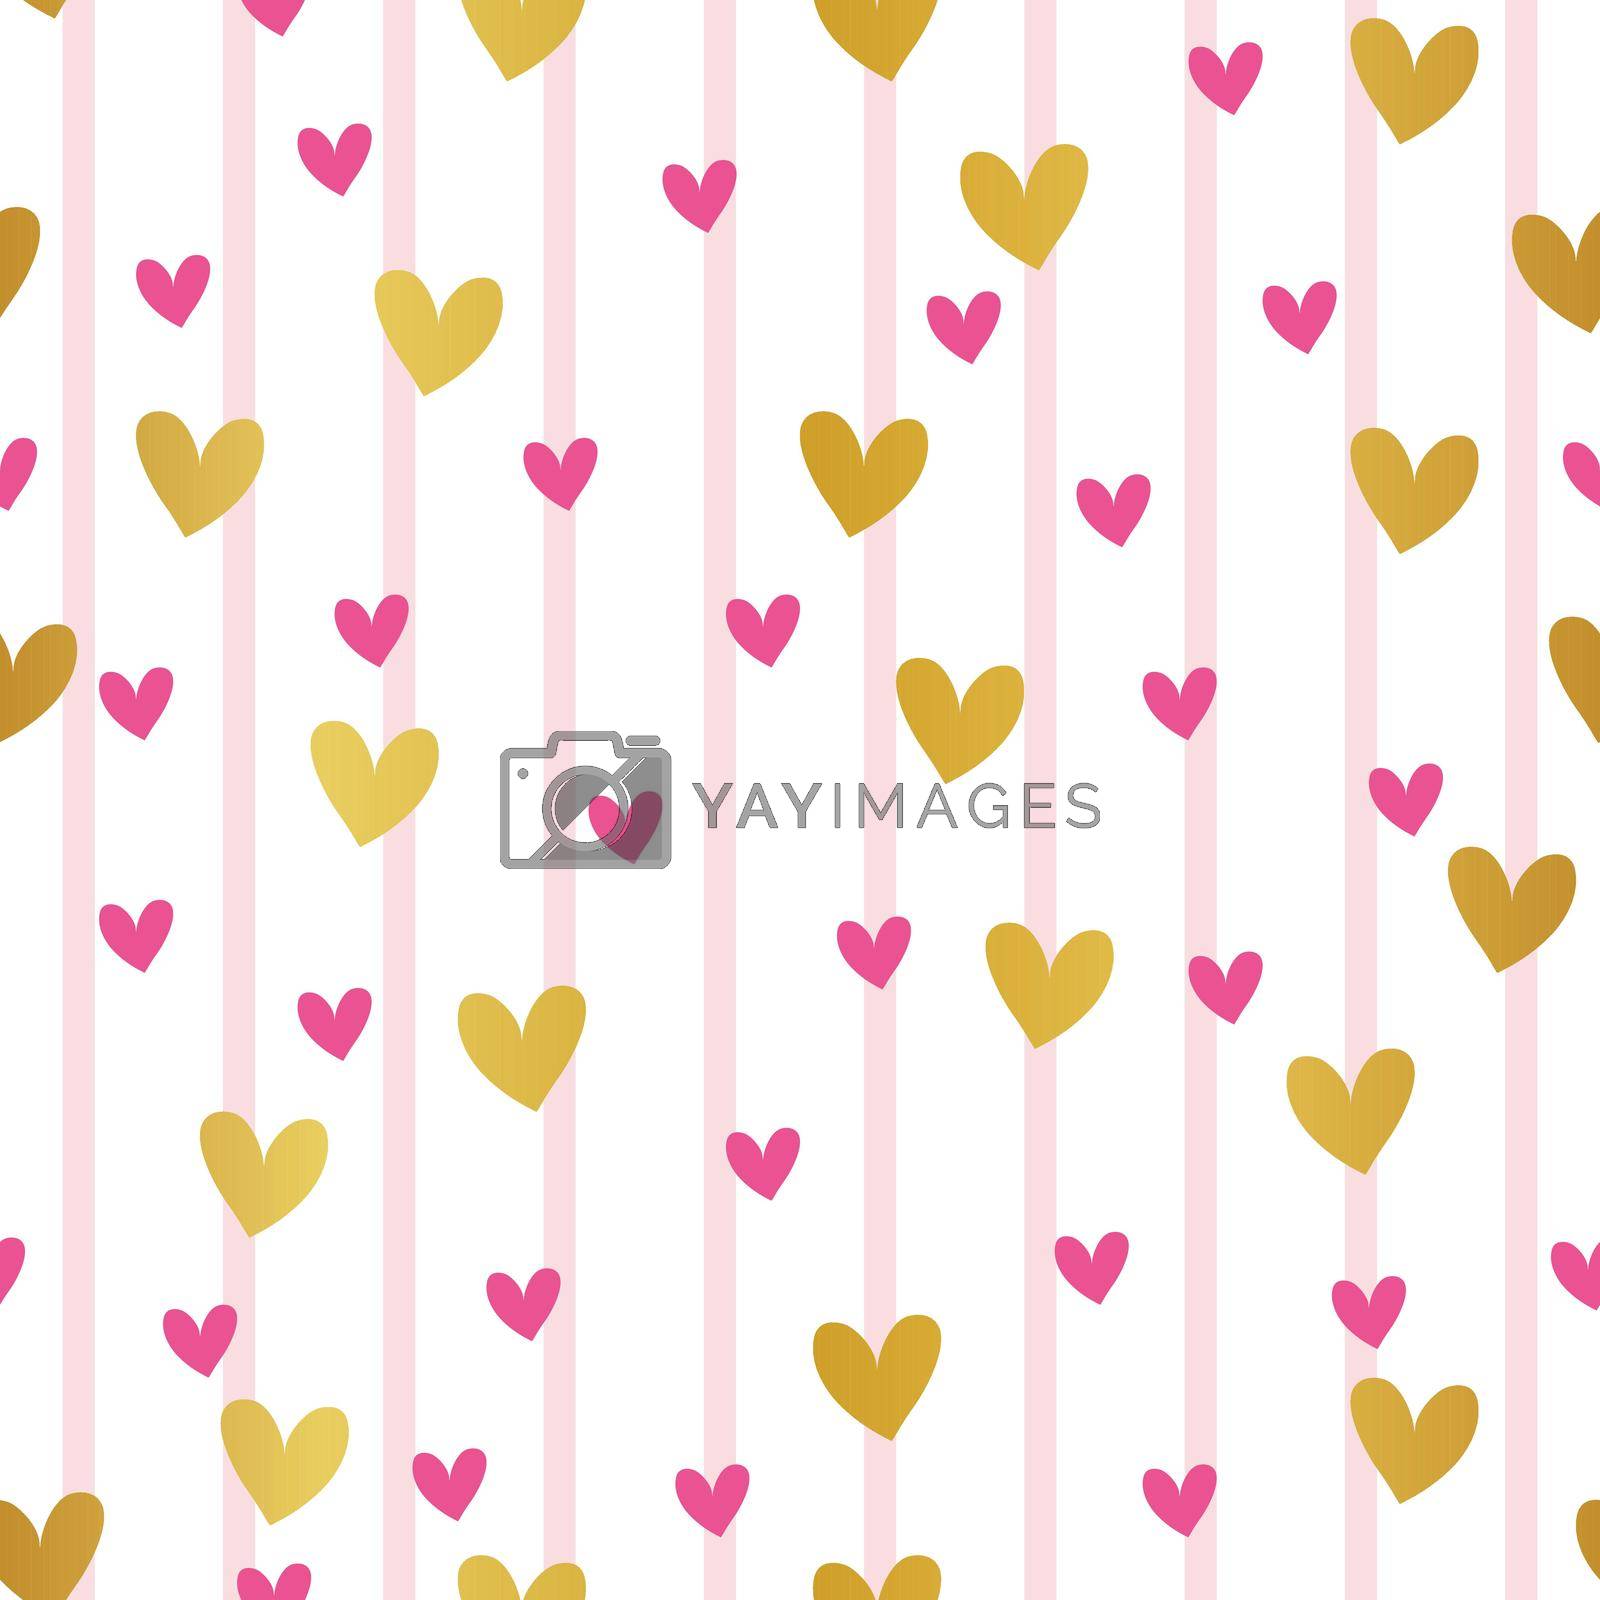 Royalty free image of Seamless pink and golden hearts on horizontal stripes by elinnet